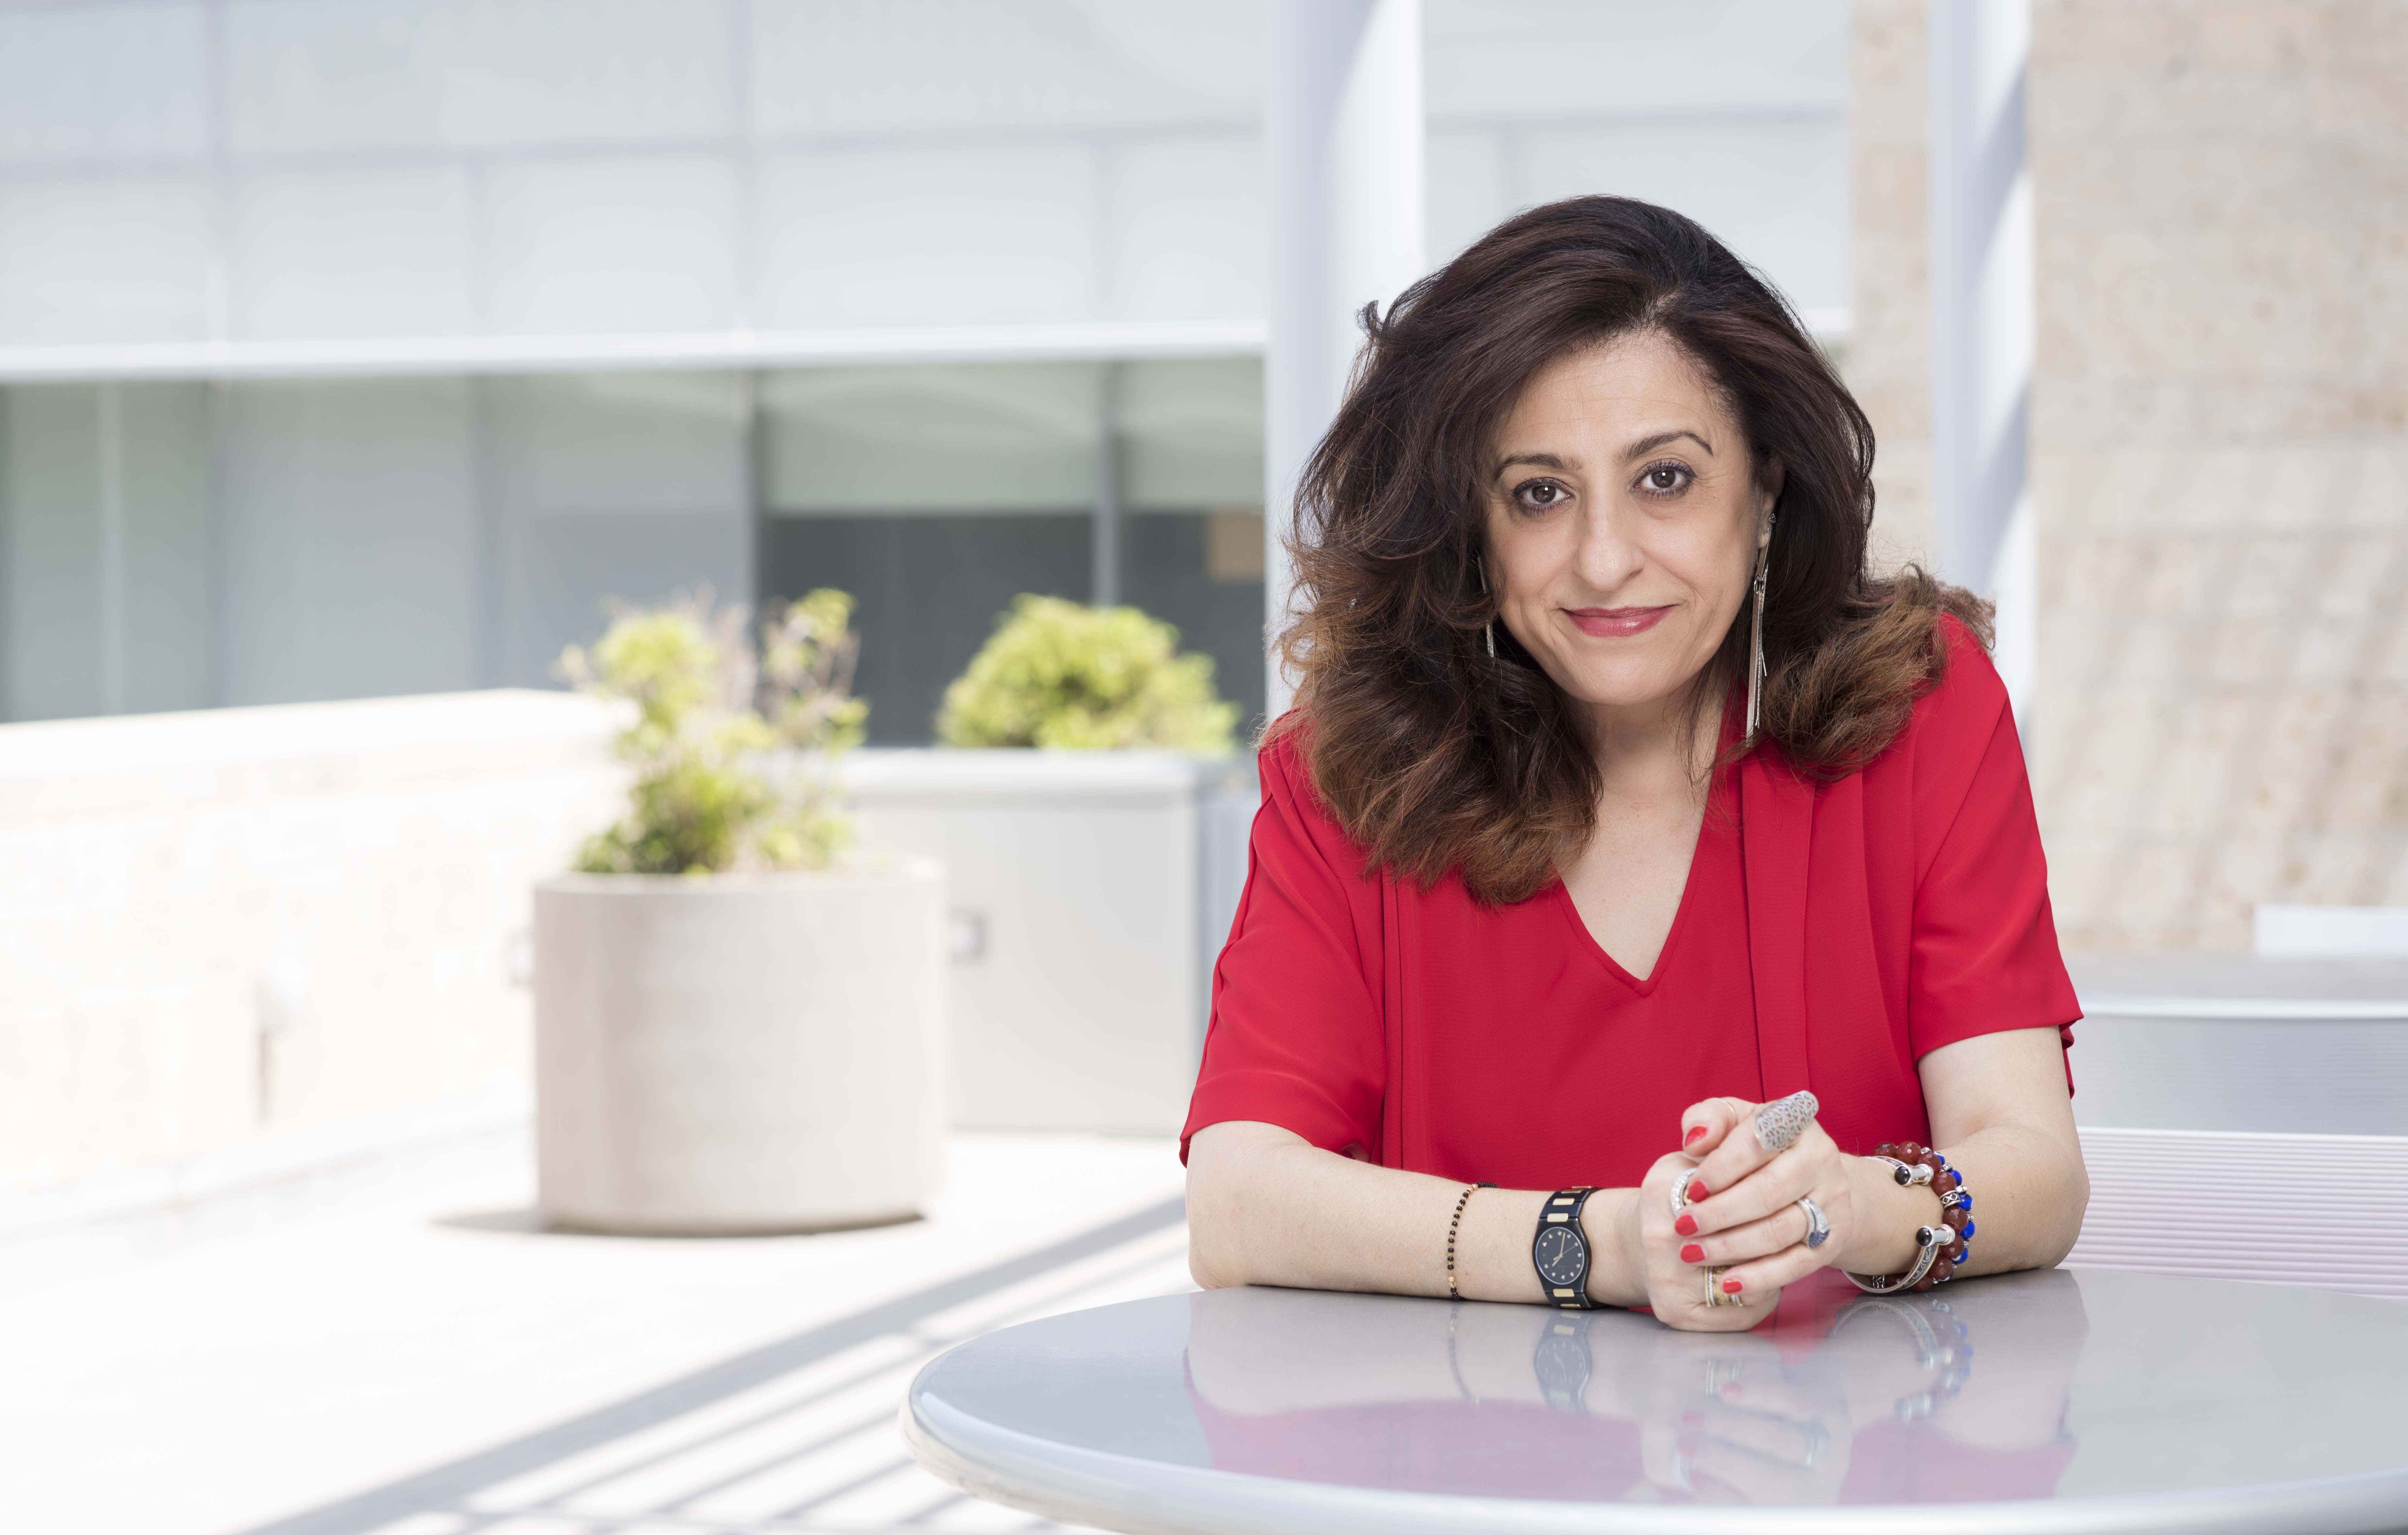 UNT art history professor Nada Shabout, known for her research in modern Arab ar